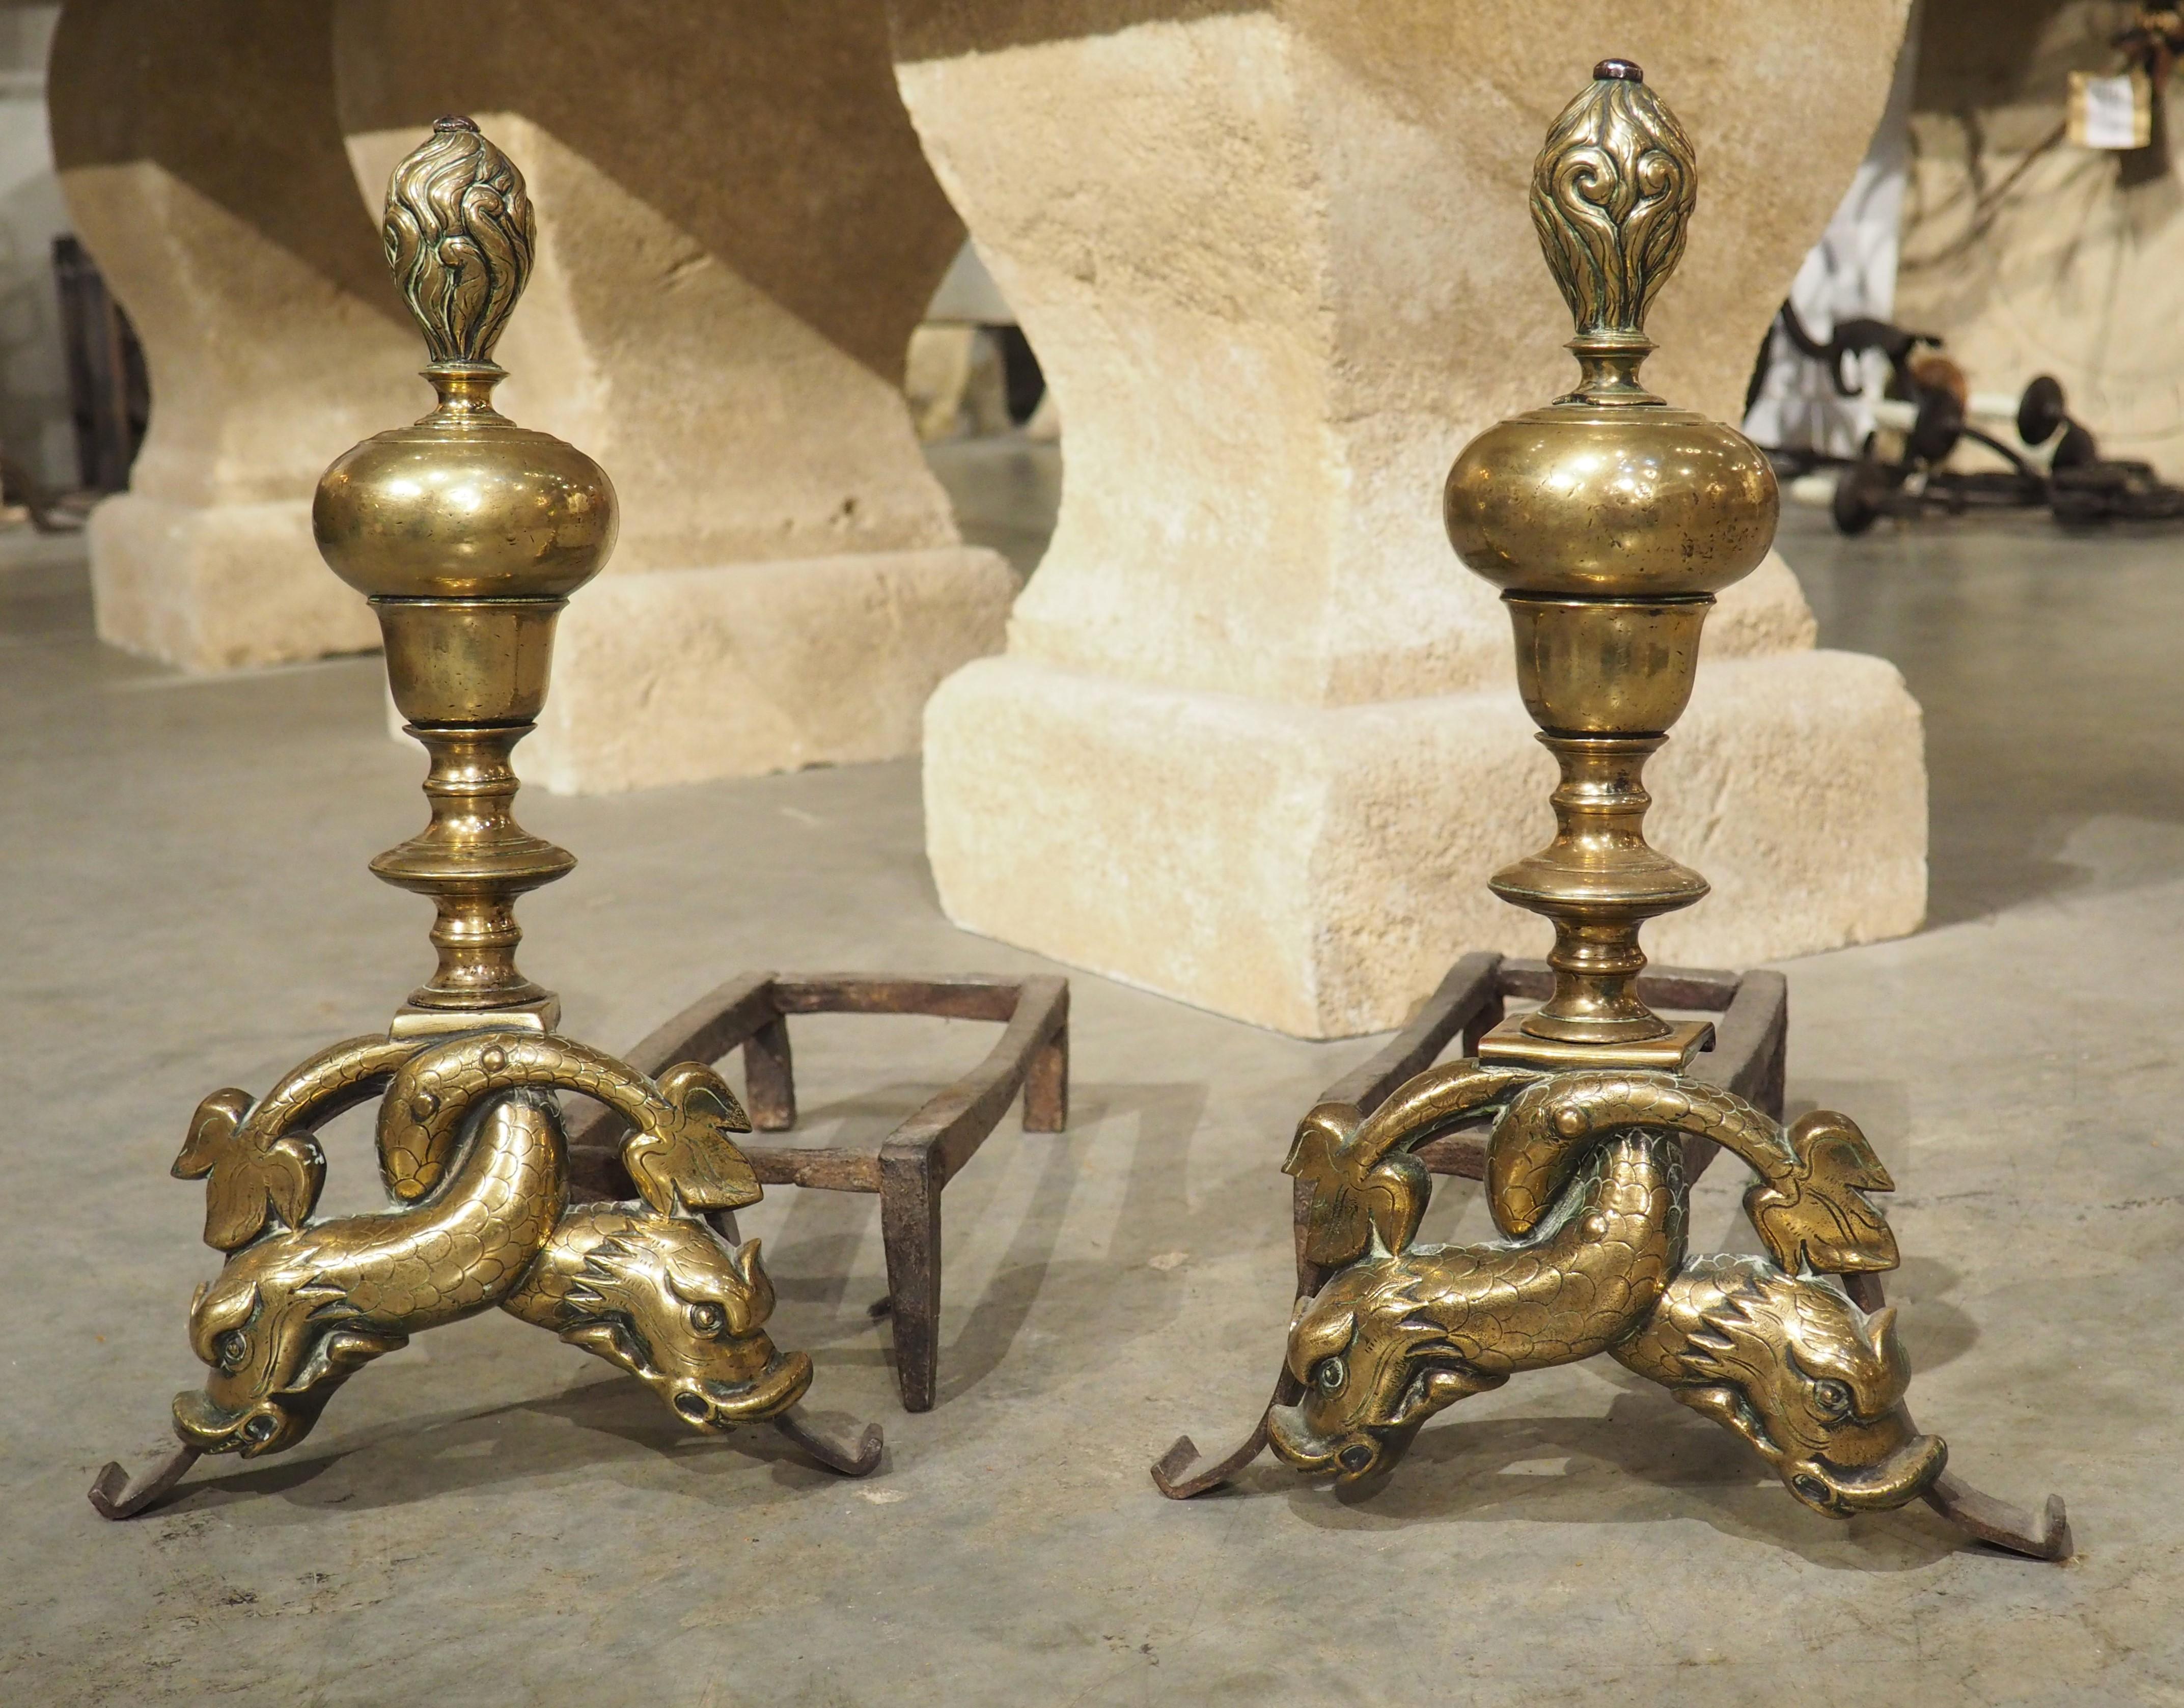 This rare pair of French bronze andirons is from the period of Louis XIV (1643-1715), which in France, was the period that the andiron reached its greatest artistic development. The motifs are intertwining dolphins with incised scales and stylized